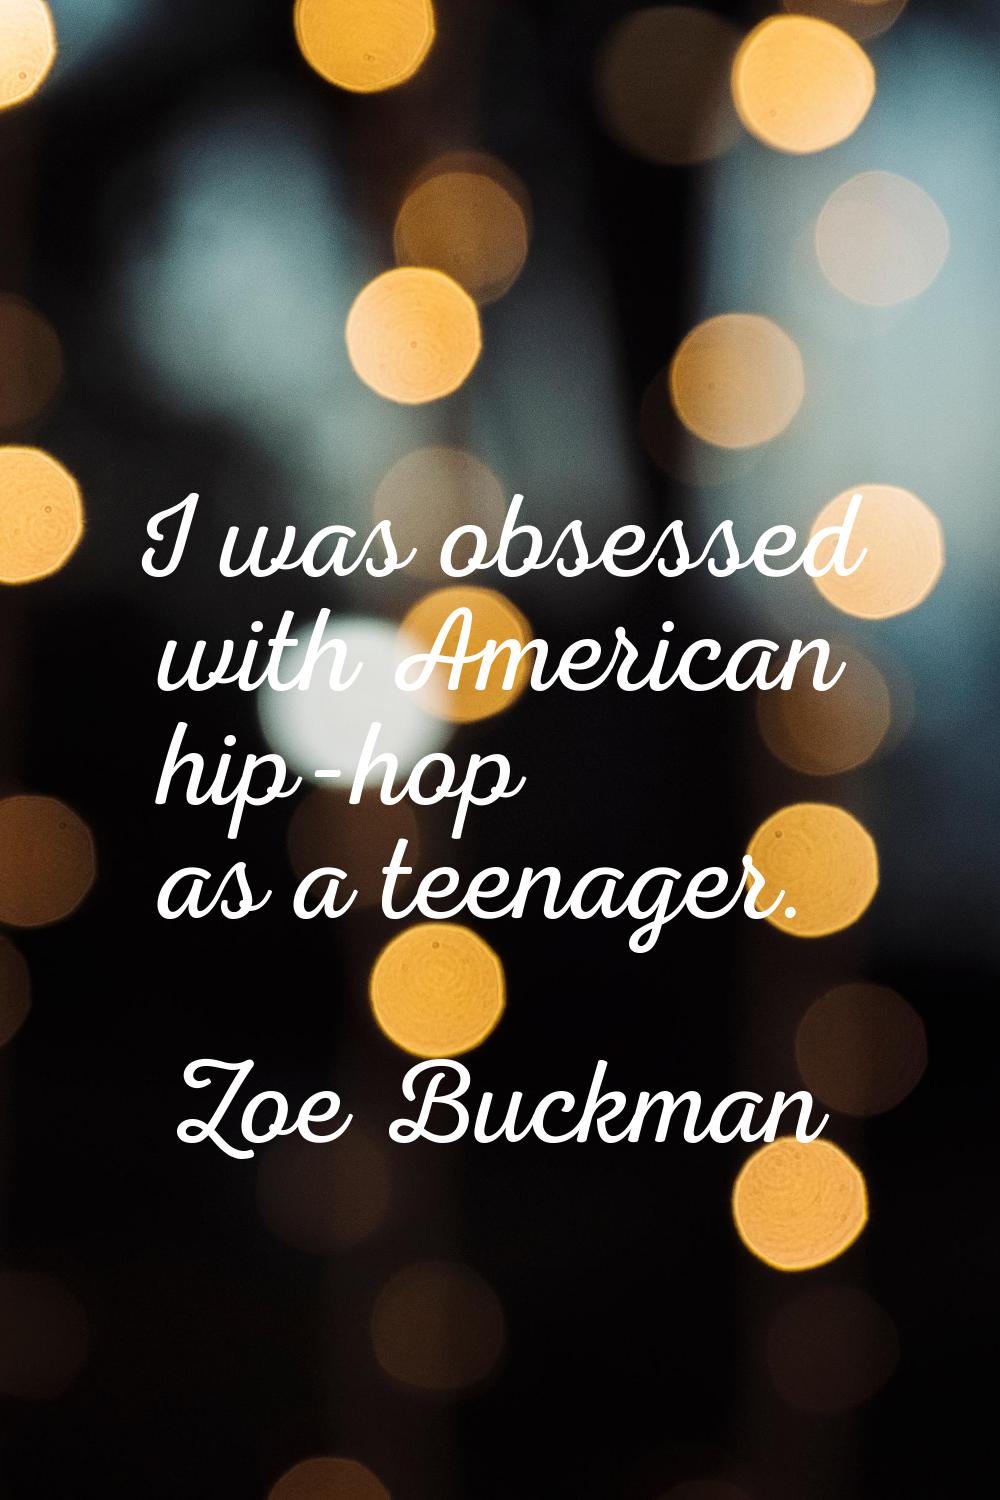 I was obsessed with American hip-hop as a teenager.